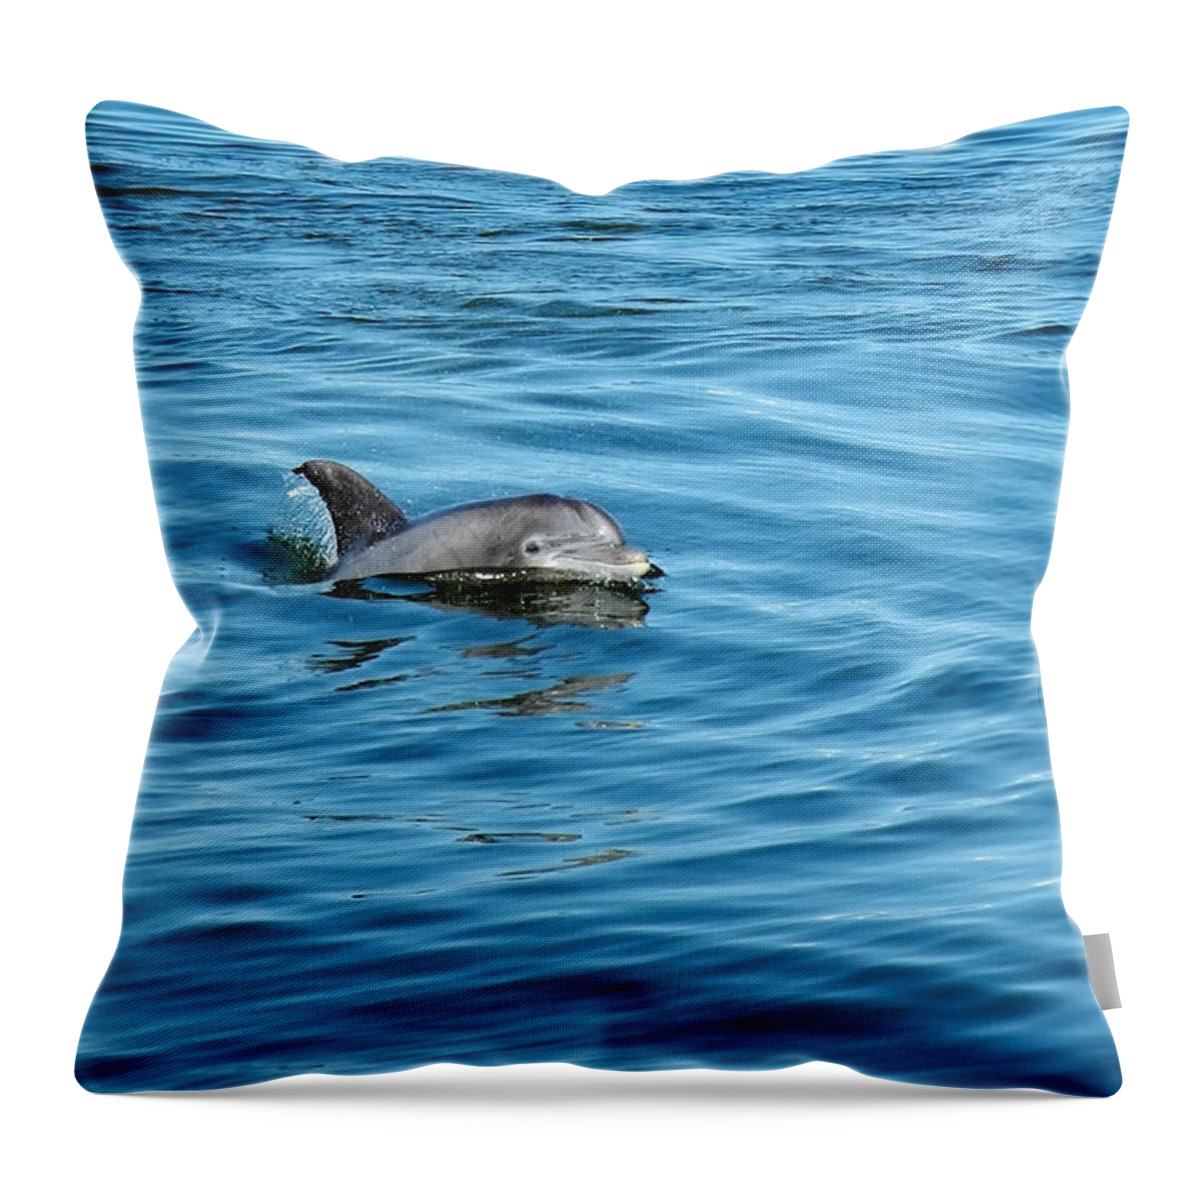 Landscape Throw Pillow featuring the photograph Smile by Sami Martin